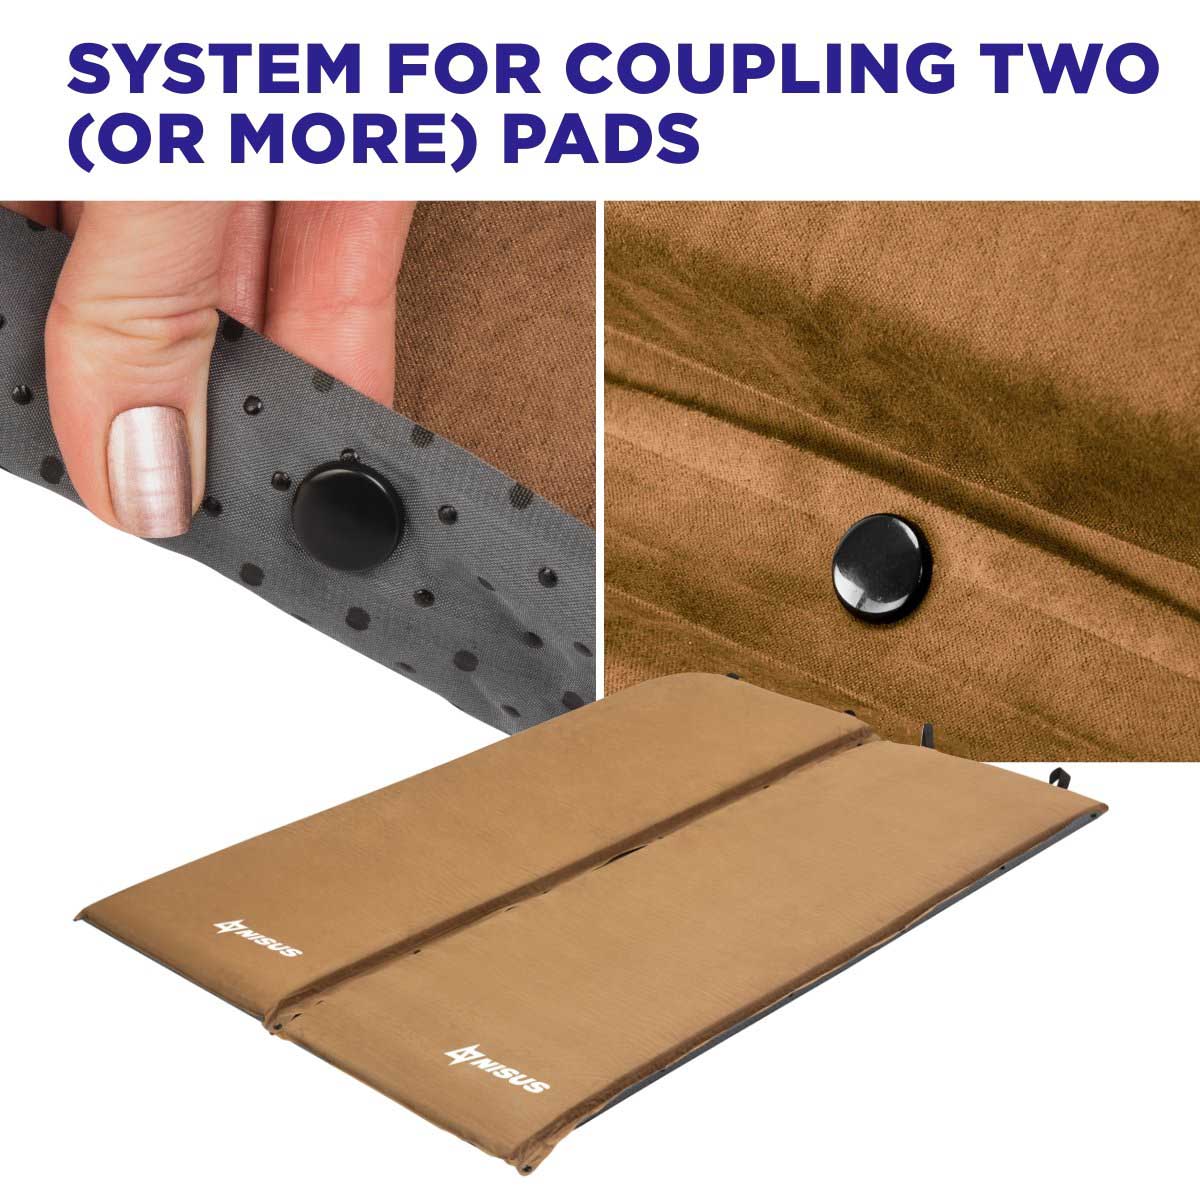 Beige Self Inflating Sleeping Pads could be easily connected one after each other with a clip to make a big pad for two